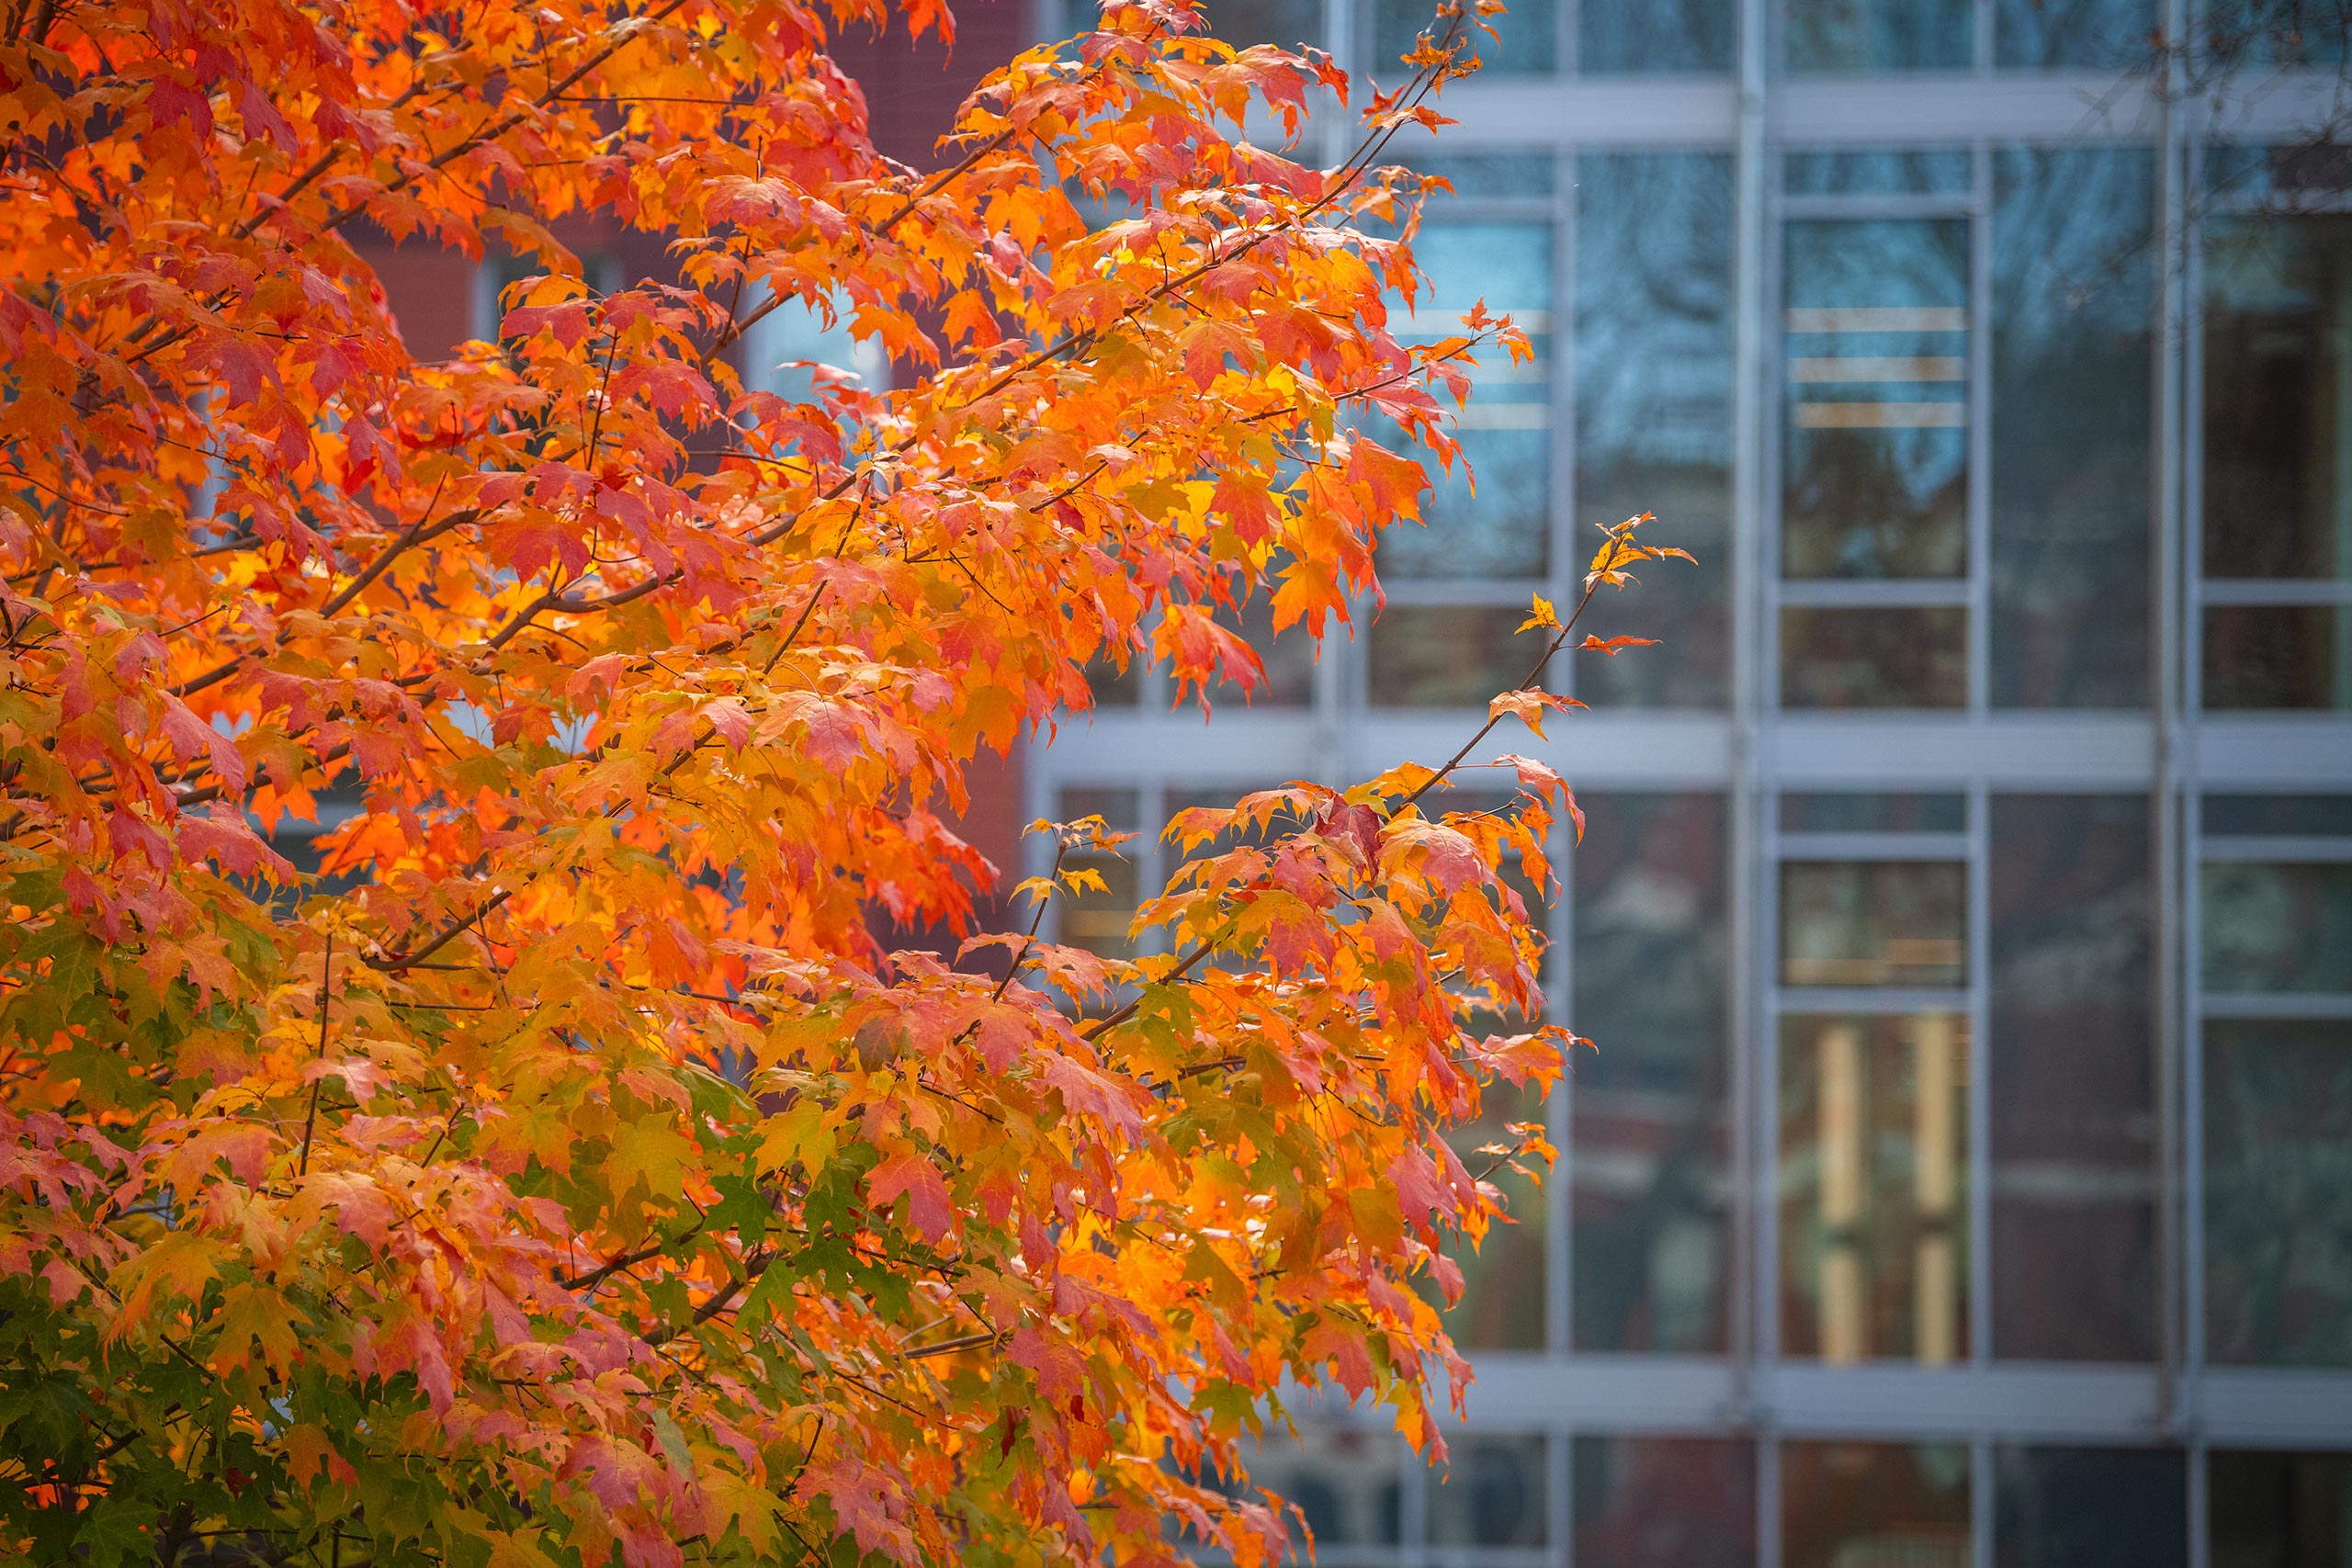 A multihued tree branch with shades of bright orange and red, Clark University campus